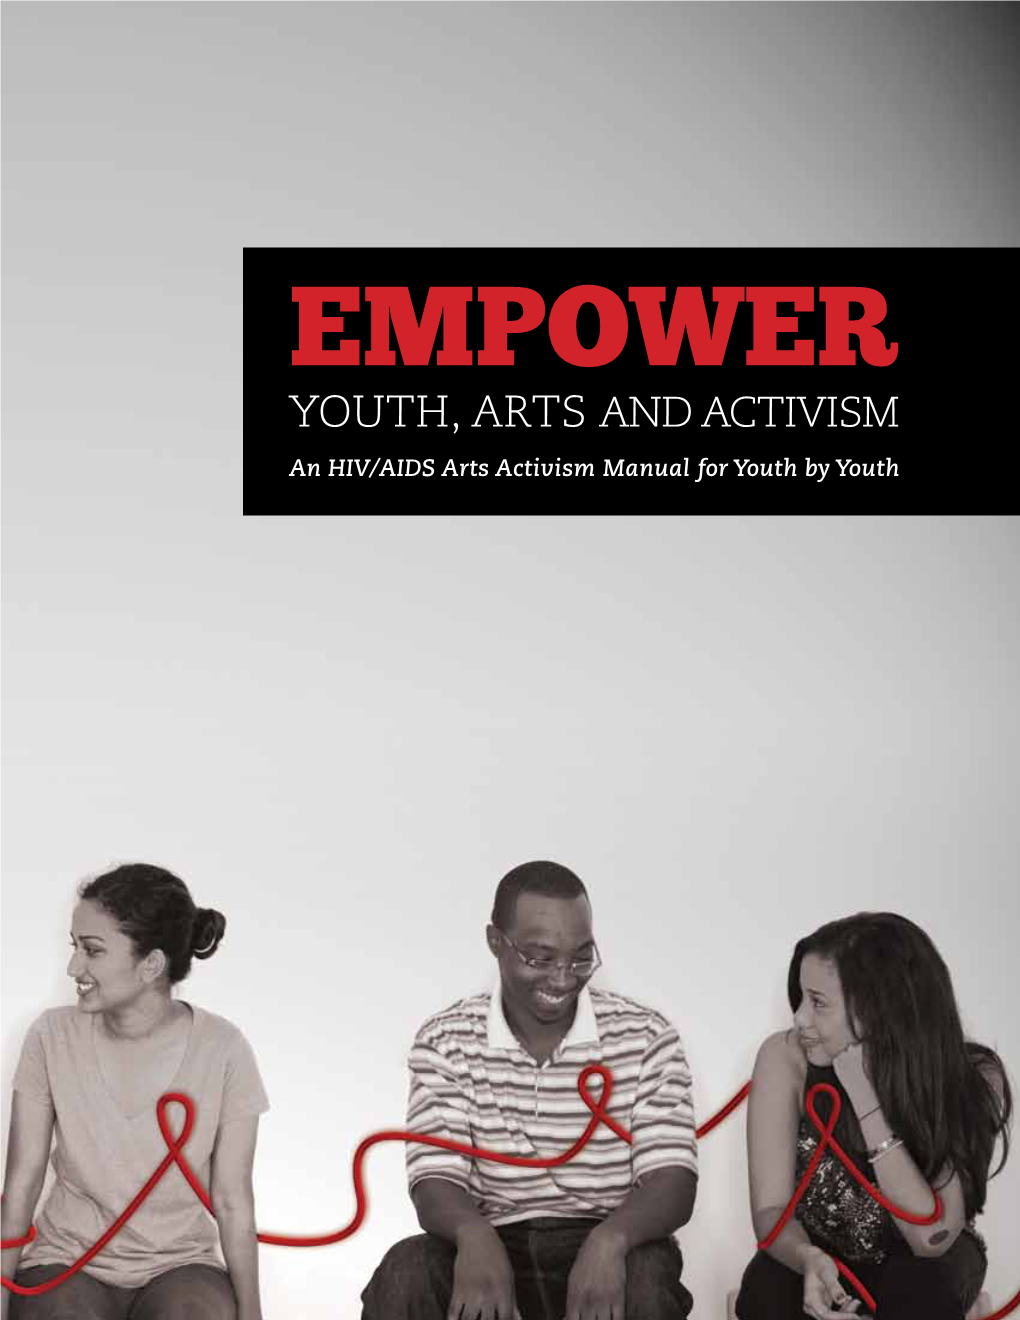 Empower Youth, Arts and Activism an HIV/AIDS Arts Activism Manual for Youth by Youth PARTNERS